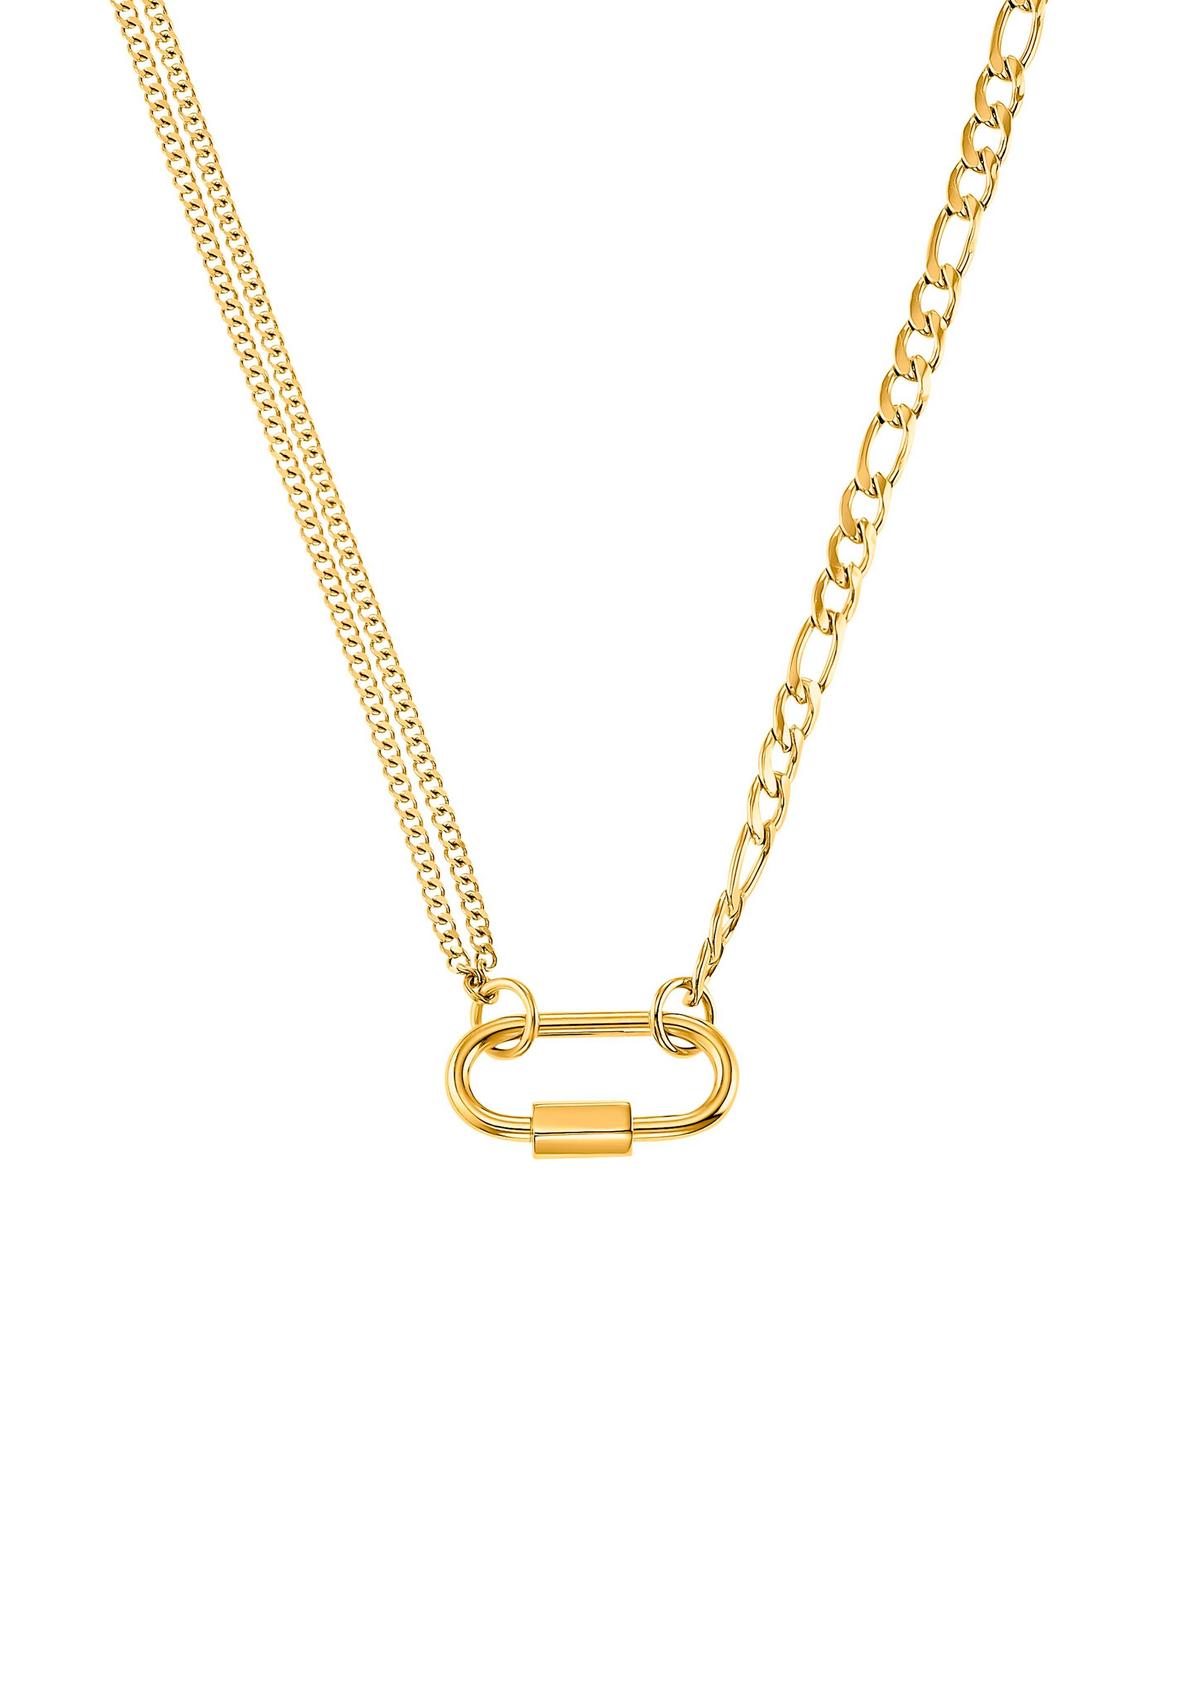 s.Oliver Statement ketting IP gold plating